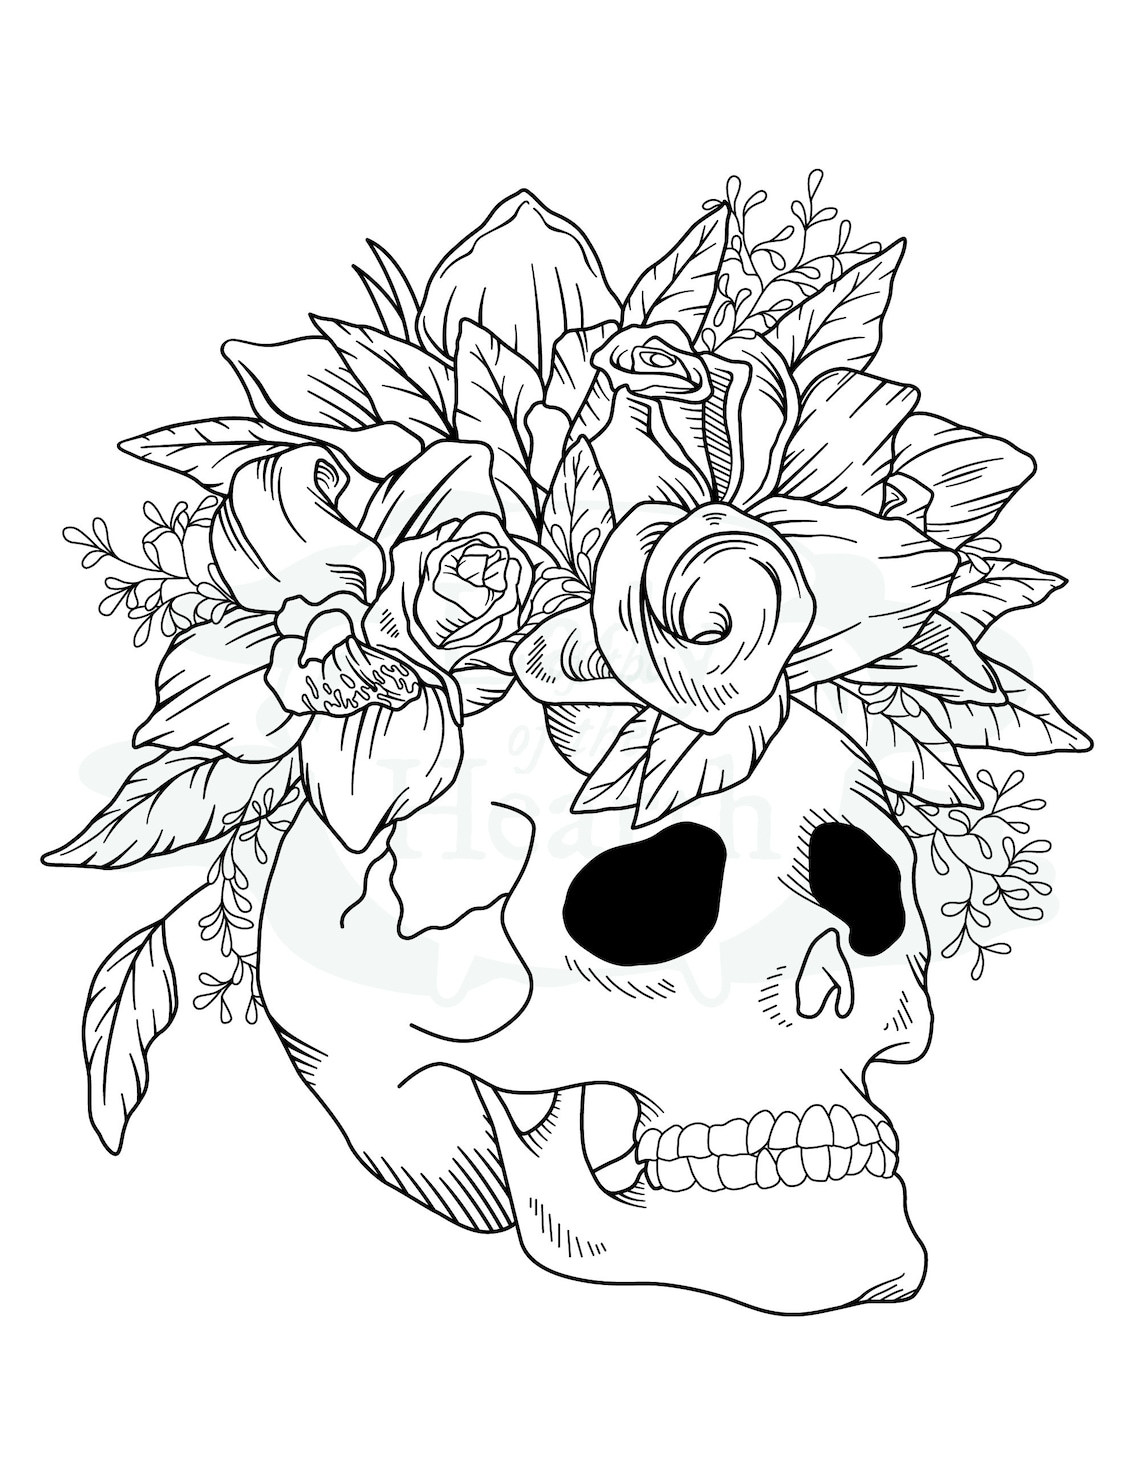 Skull With Flowers Printable Coloring Page - Etsy